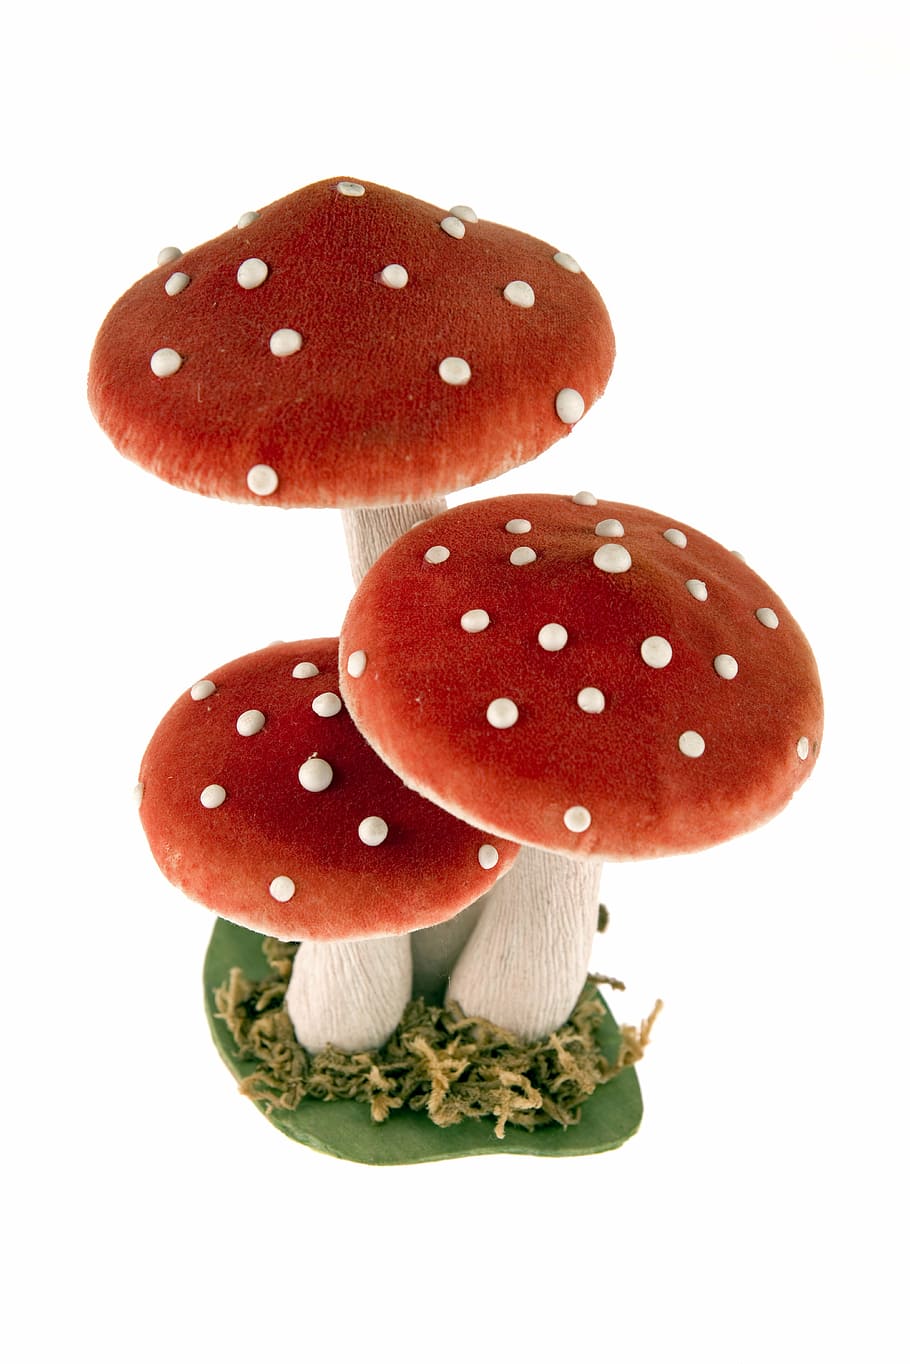 toadstools, mushrooms, a few, artificial, red, white, ornament, decoration, still life, fungus